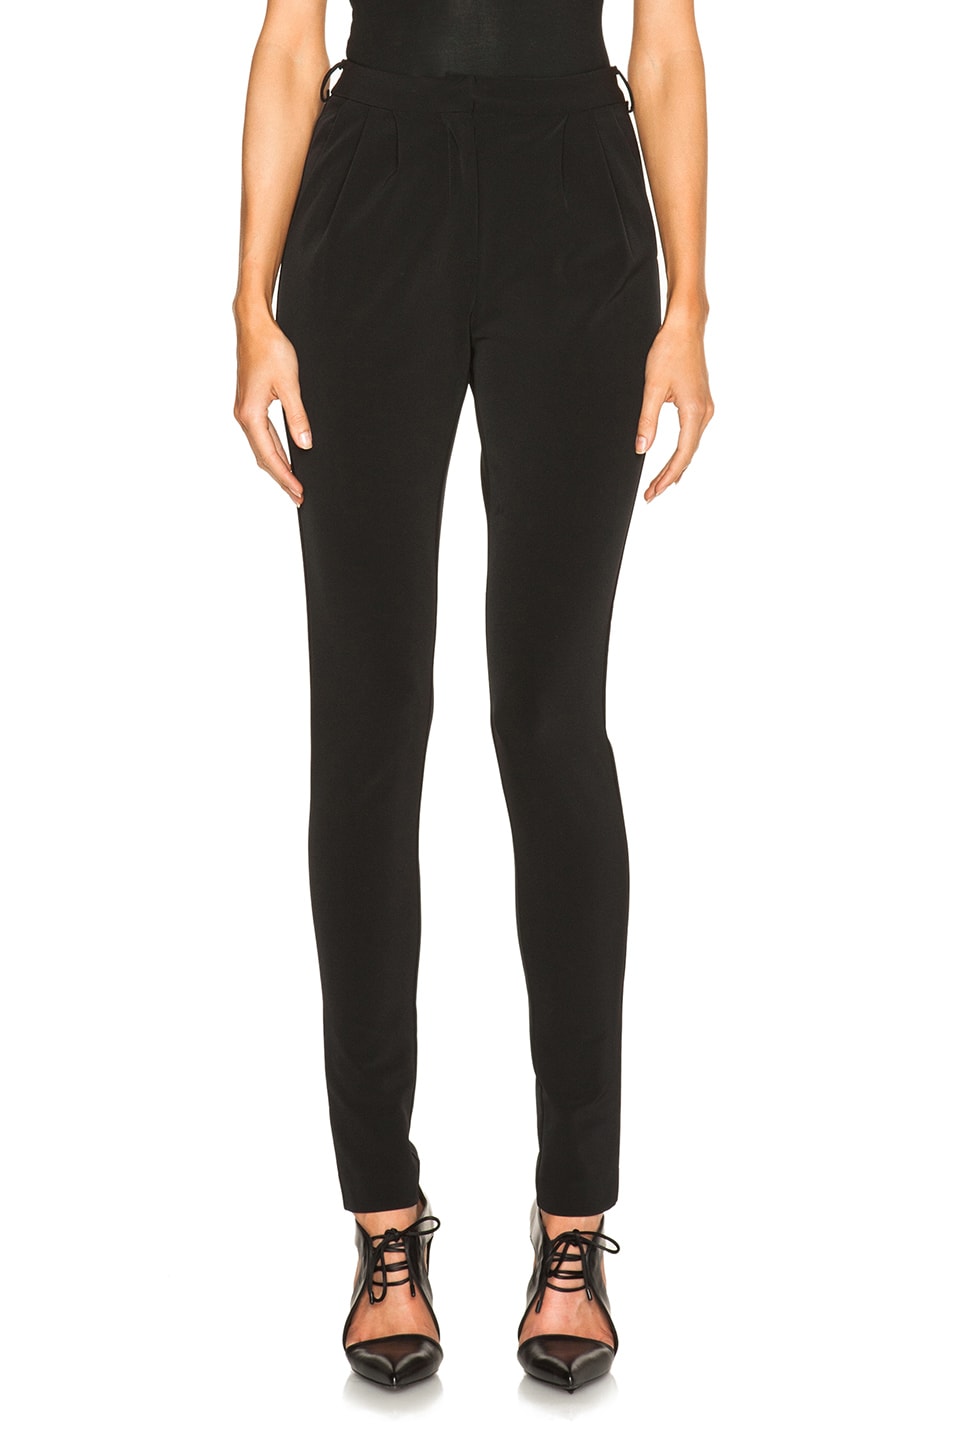 Image 1 of Carisa Rene by Nightcap High Rise Trousers in Black